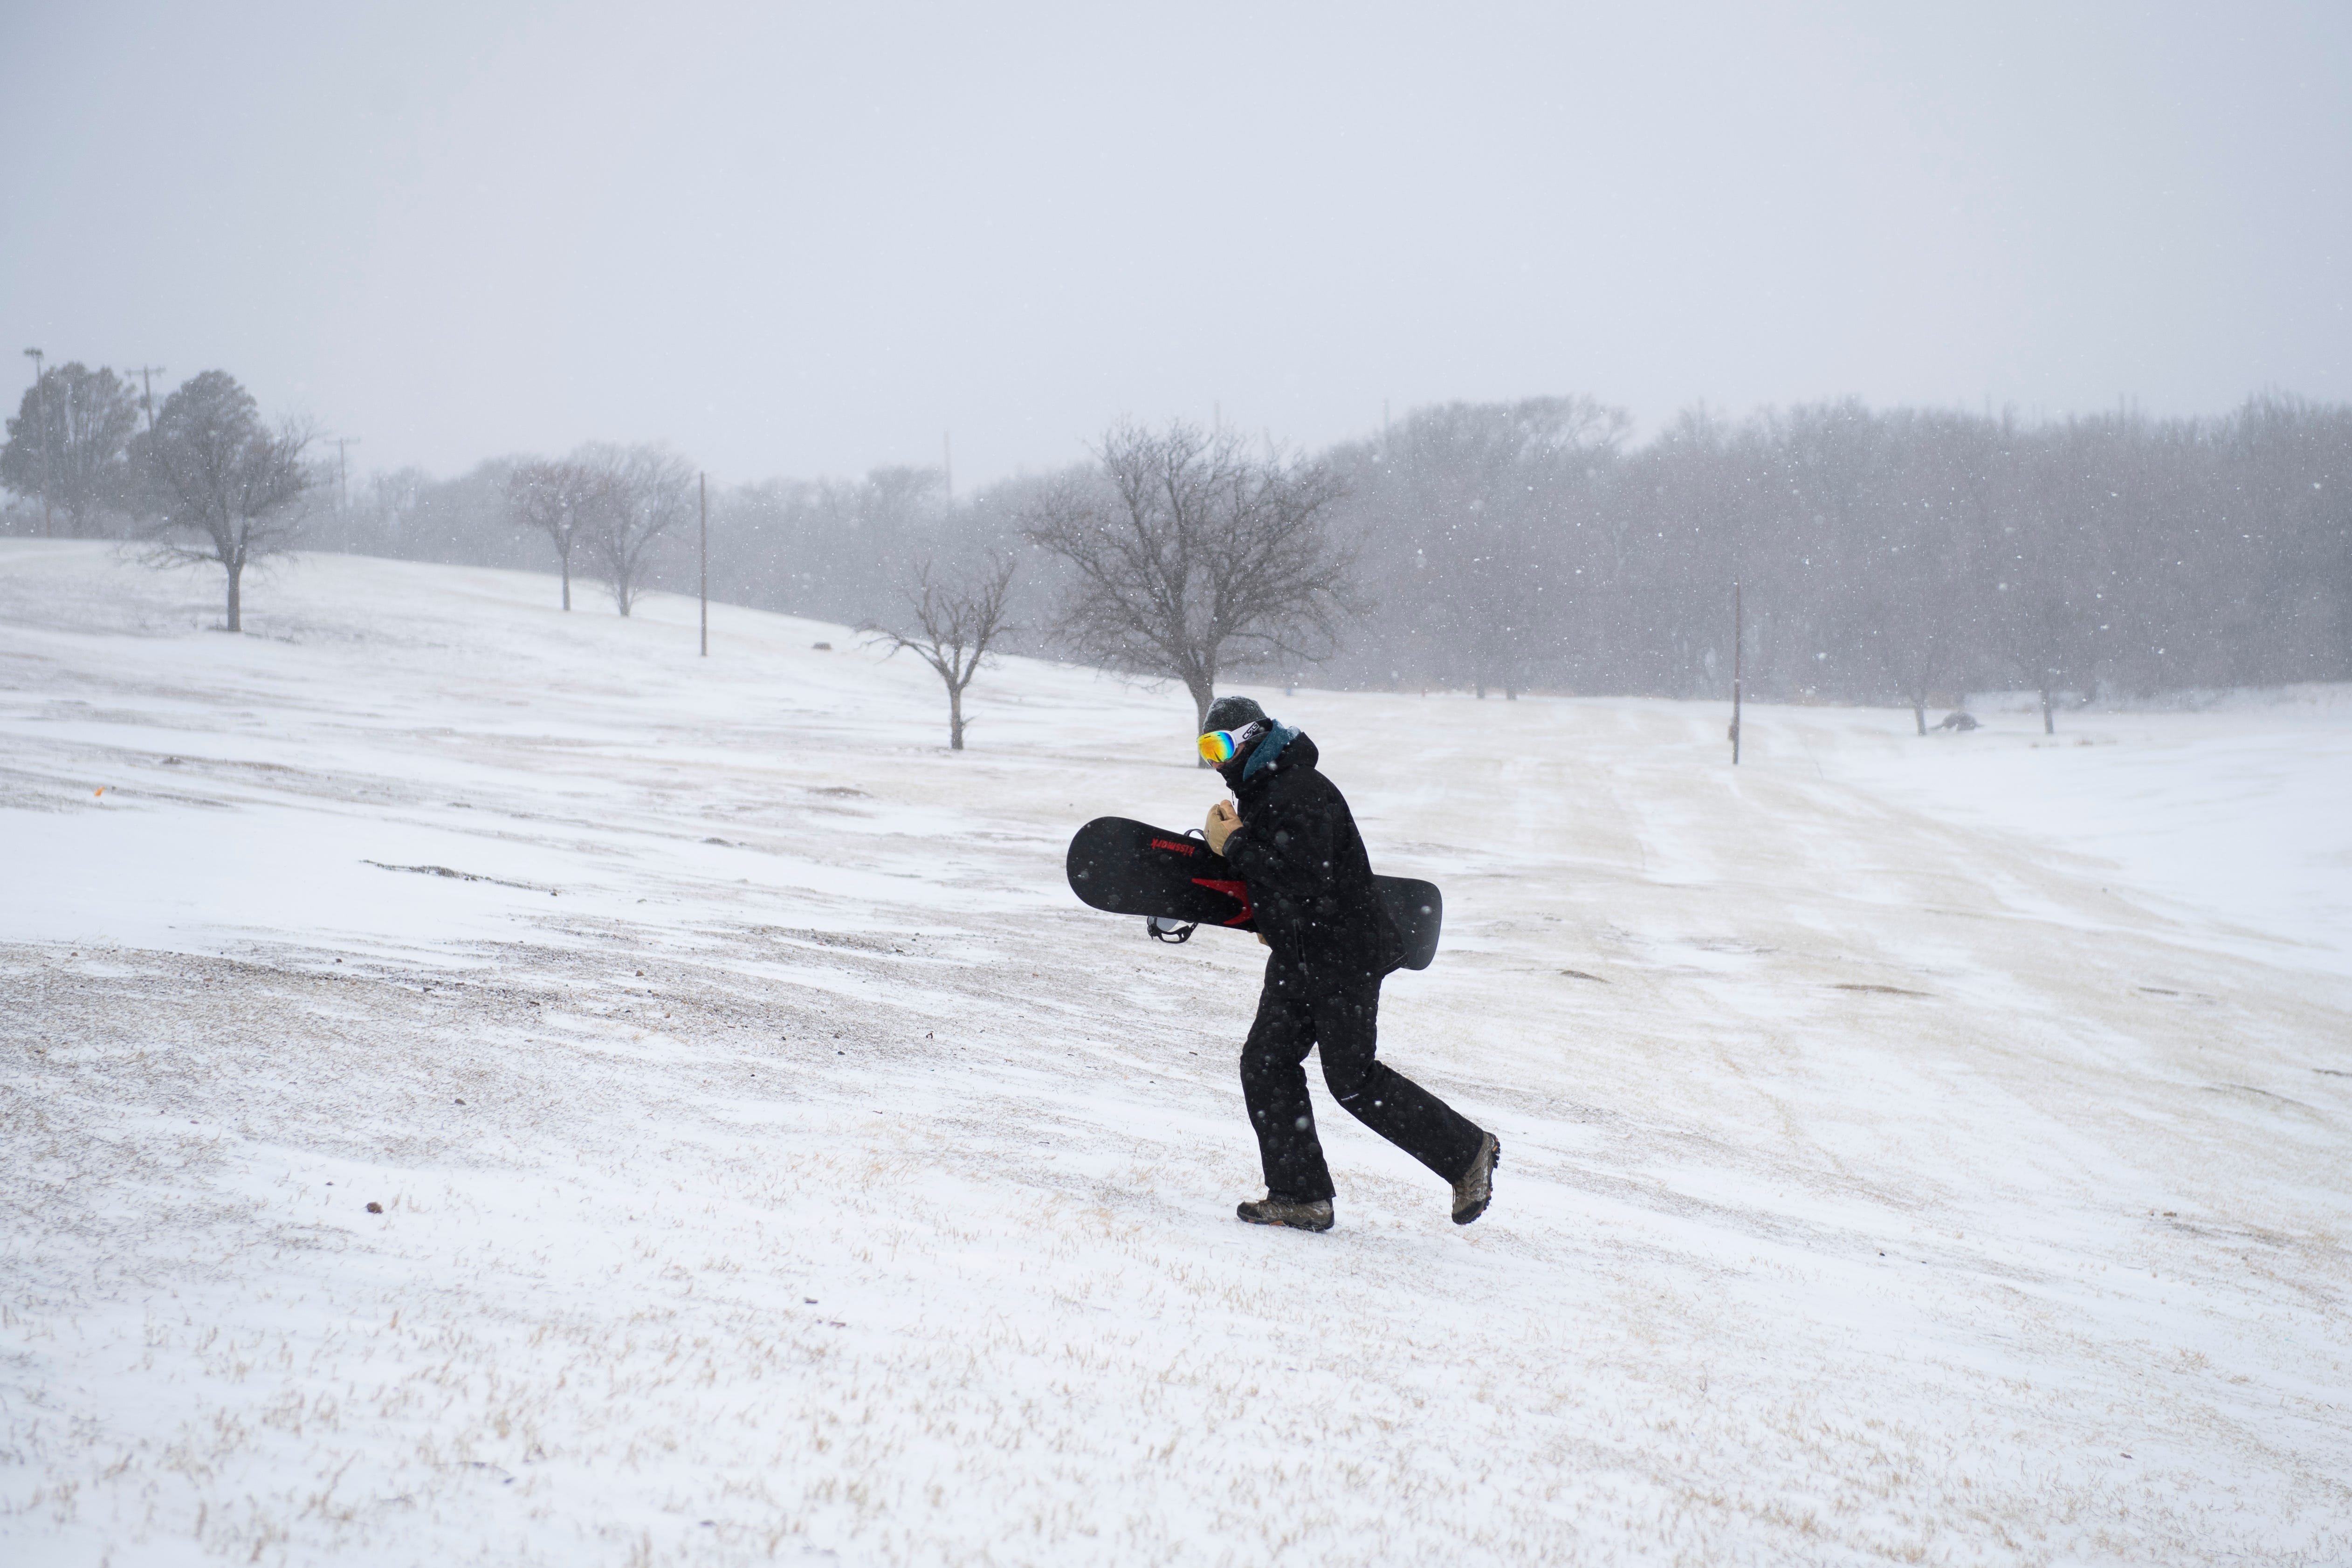 Nick Kuehn hike up a hill after snowboarding down it in Mae Simmons Park on Sunday, Feb. 14, 2021, in Lubbock, Texas.